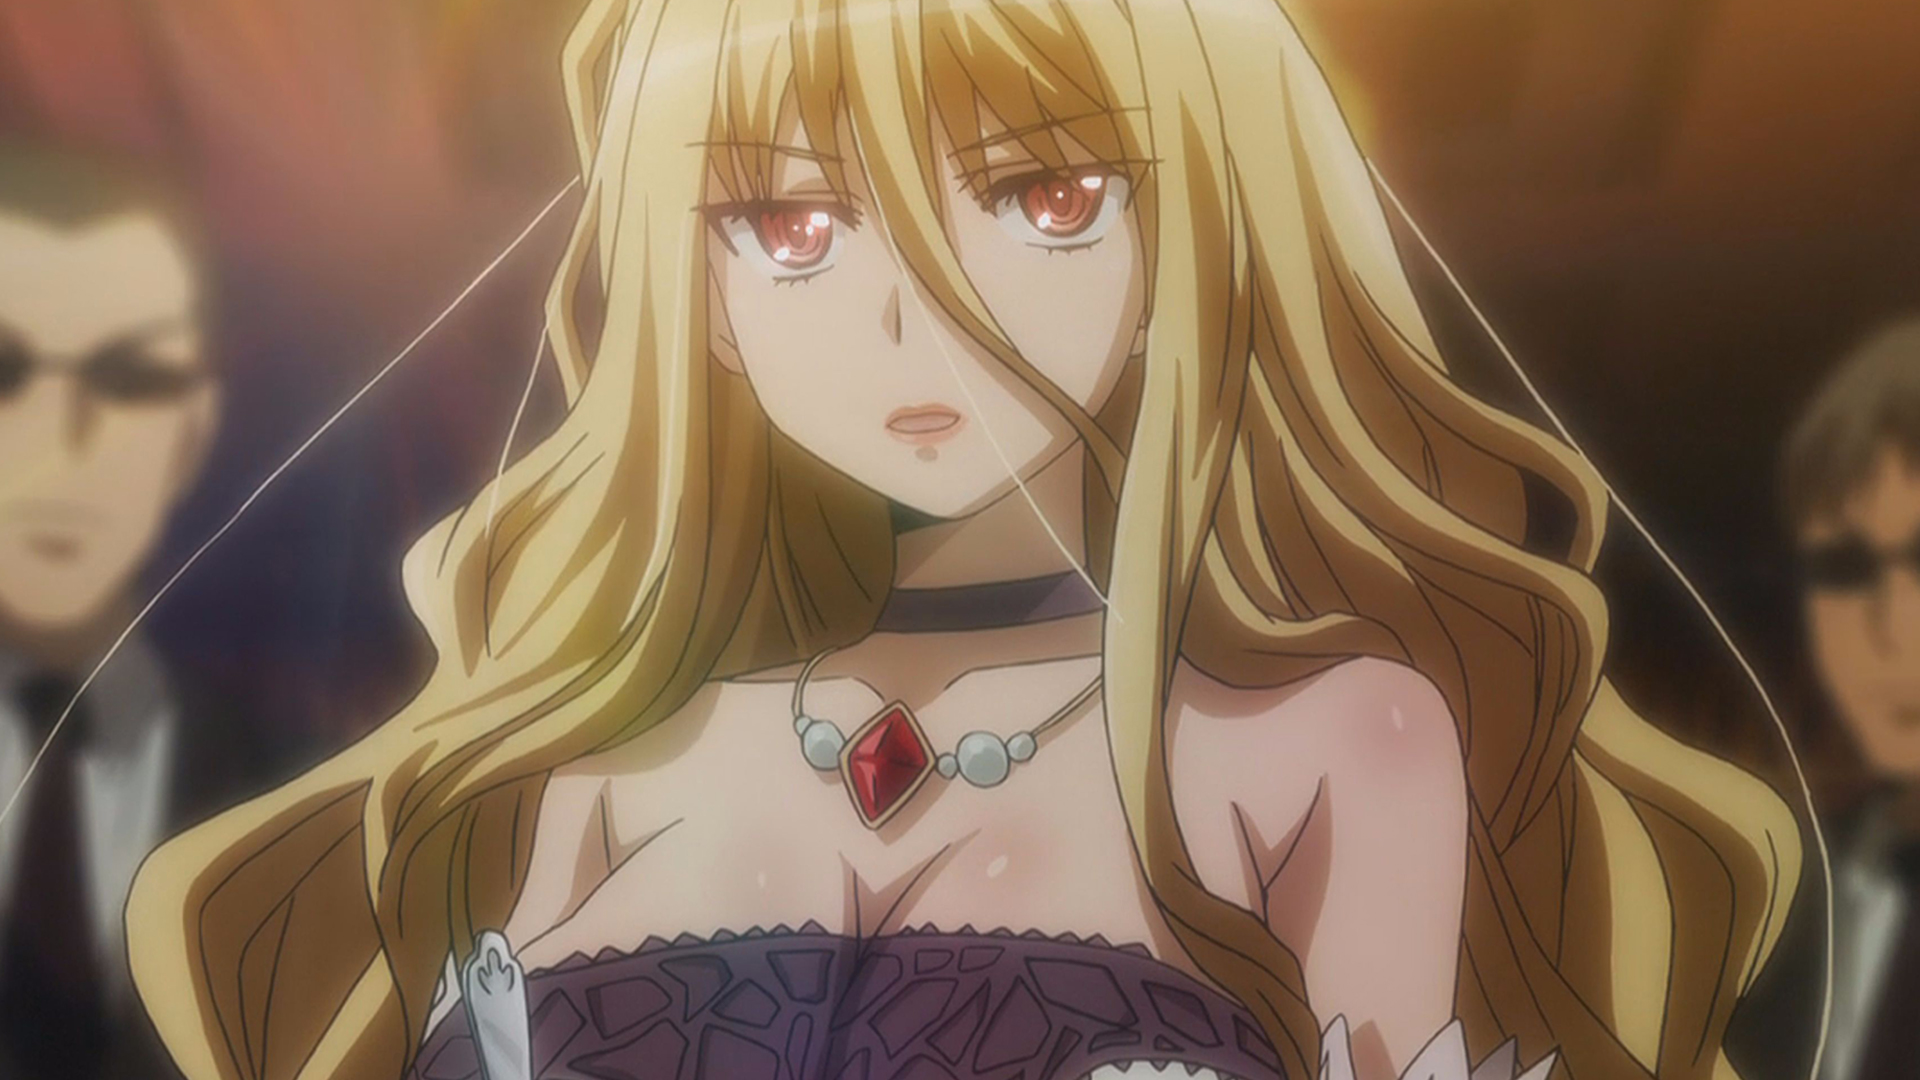 These 19 Hot Female Anime Villains Are Dangerous Beauties